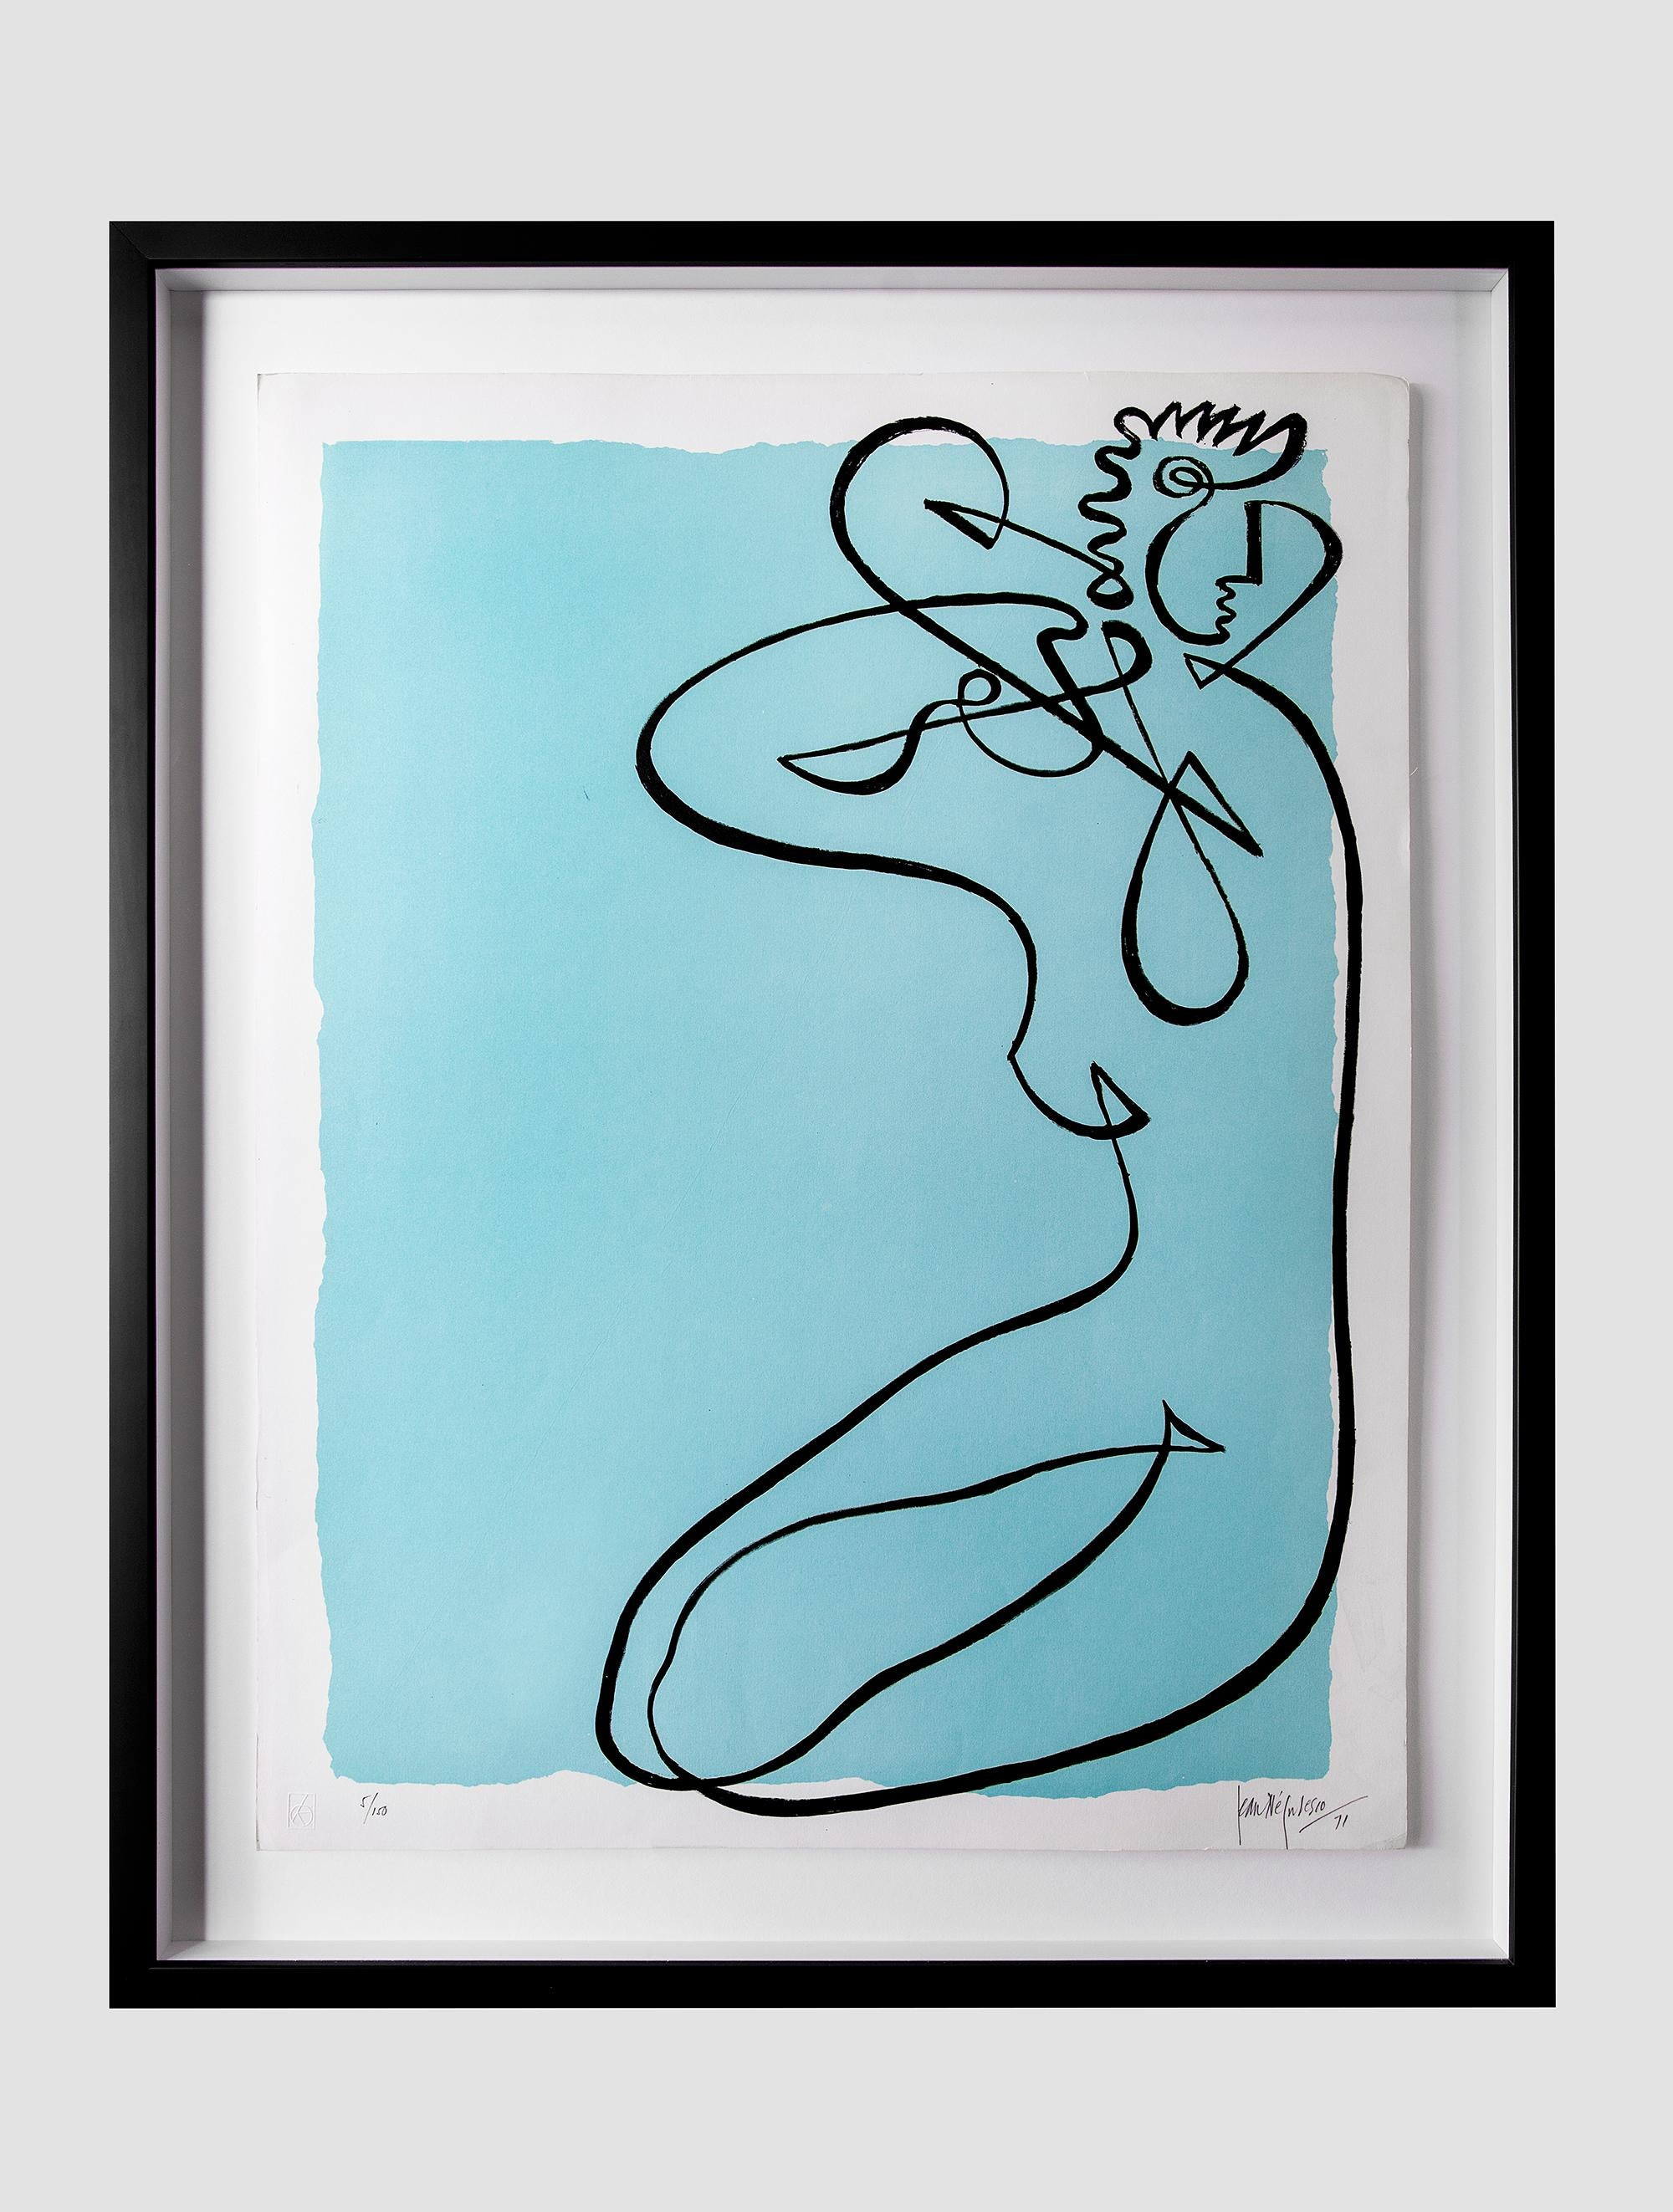 Beautiful continuous line drawings by Jean Negulesco - Oscar award winning Hollywood director. Newly framed. 

4 different variations available, priced individually: 
Black frame, sea foam green background, and black line drawing - signed and